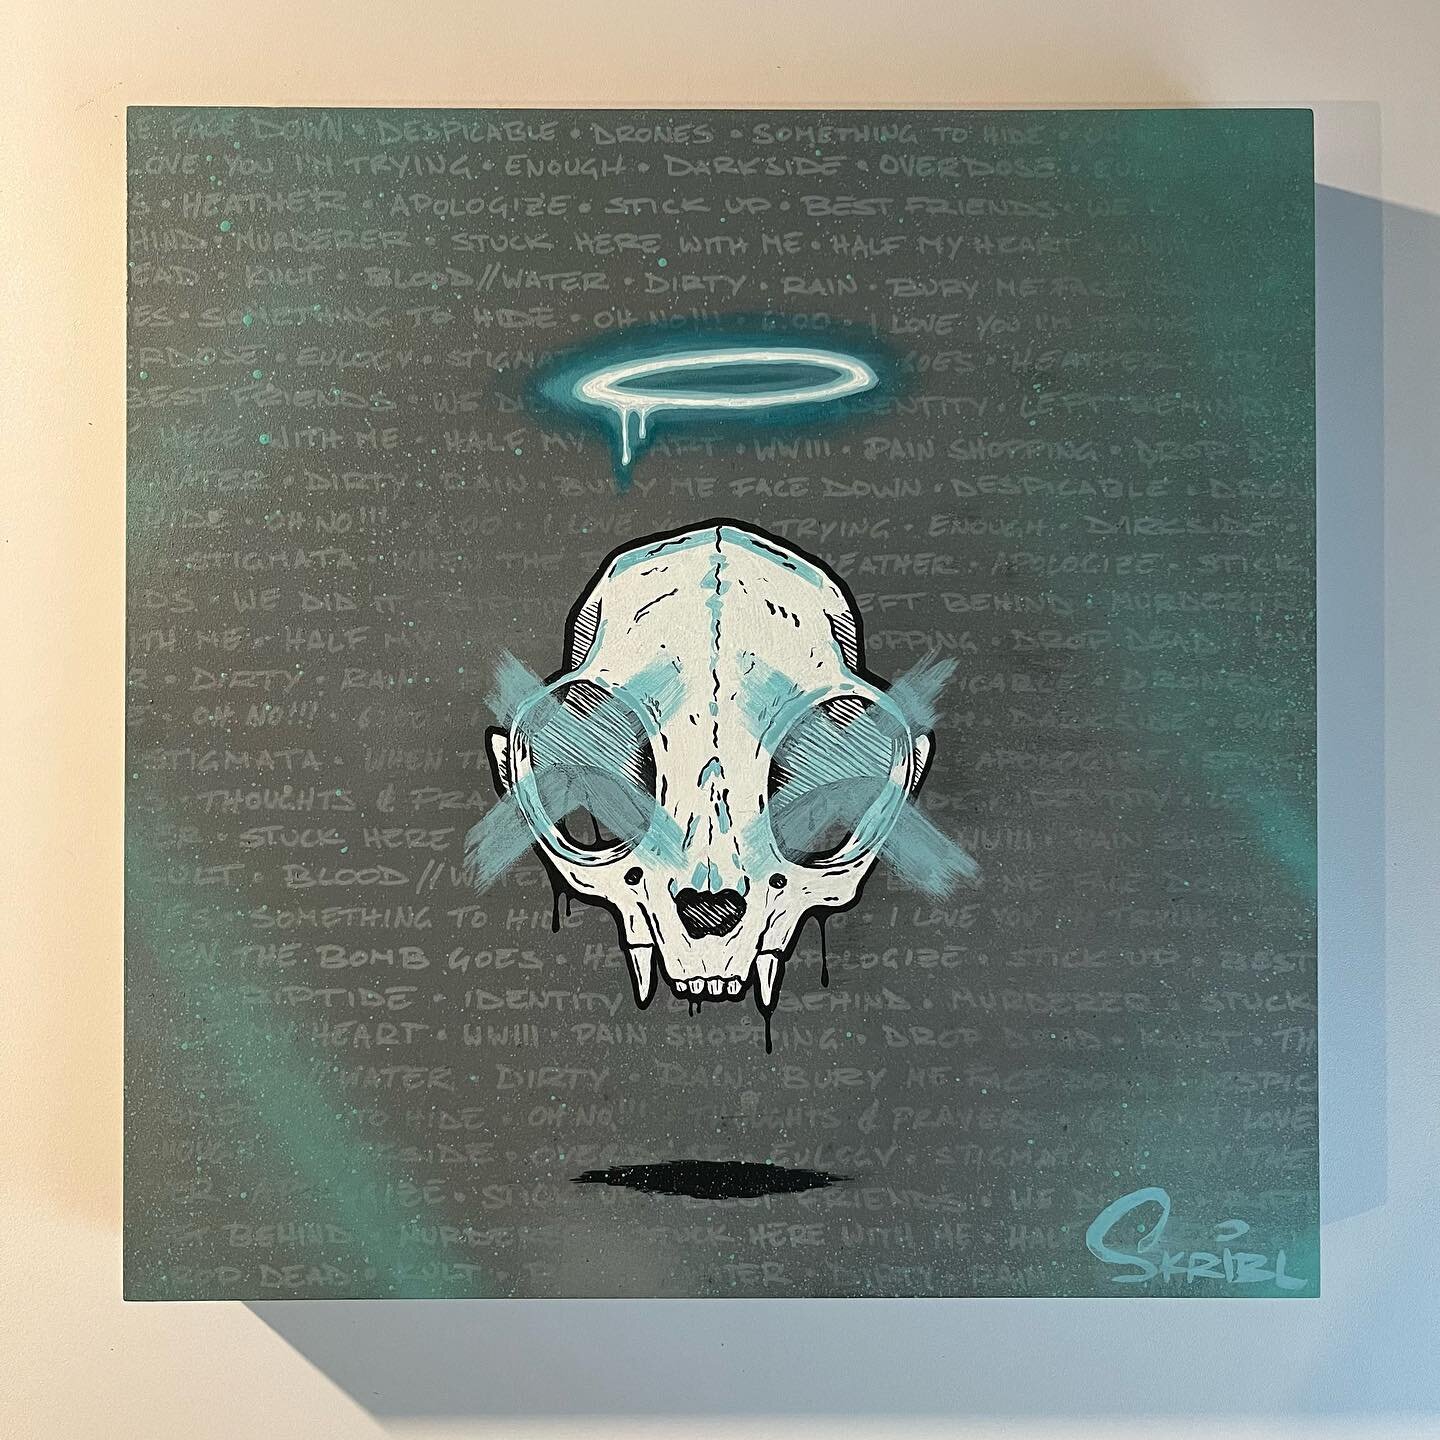 &ldquo;Human Impact&rdquo; 30cm x 30cm

Acrylic on Wood

This piece was inspired and made for the one and only @grandson. Still awestruck and thankful that I got my art into his hands. 
Prints to come soon 

#skullart #painting #acrylic #ilyit #small